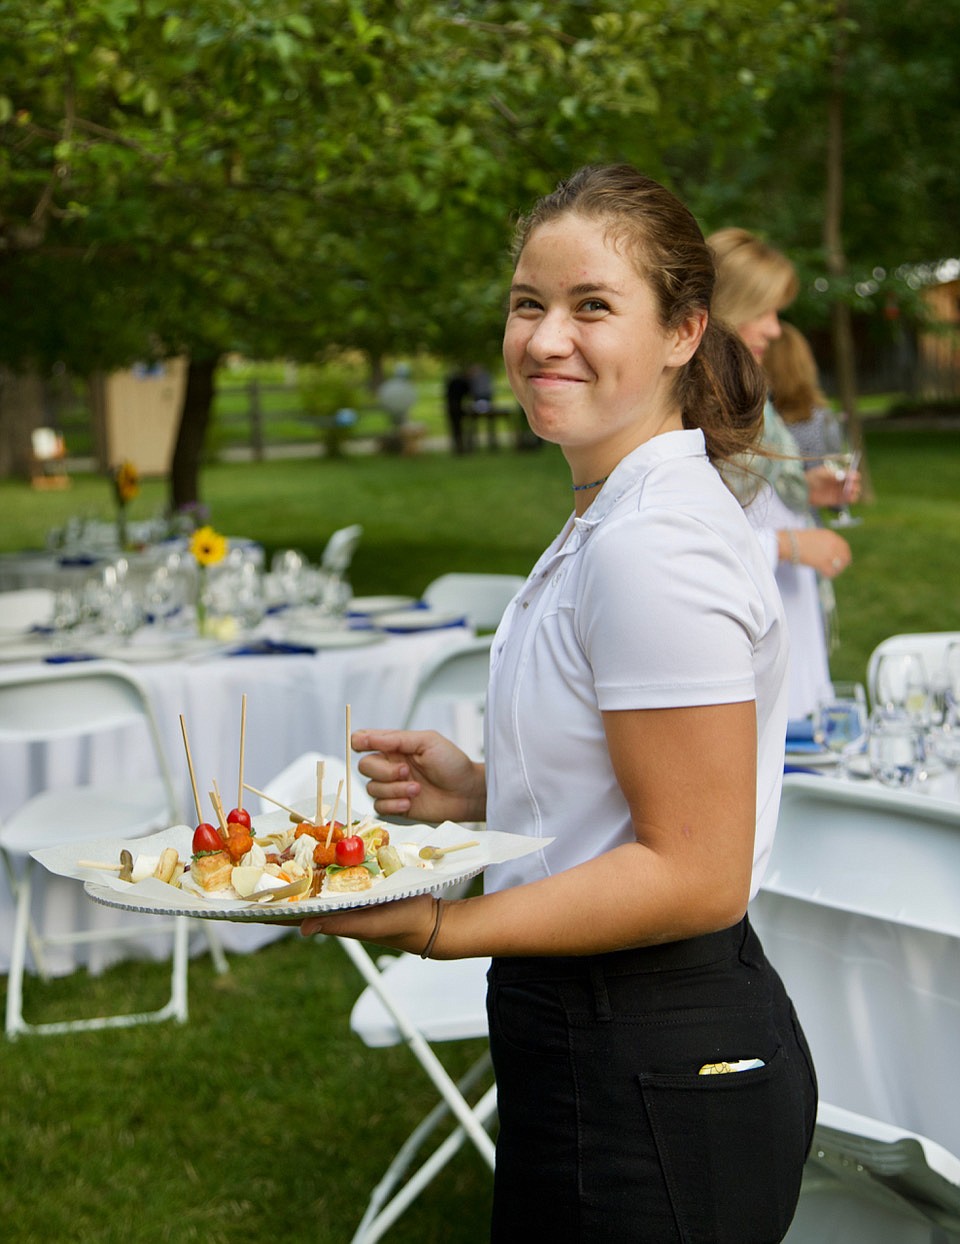 Served with a smile: Evening cuisine was created by chef Dan Solberg of Street Legal. (Kay Bjork photo)